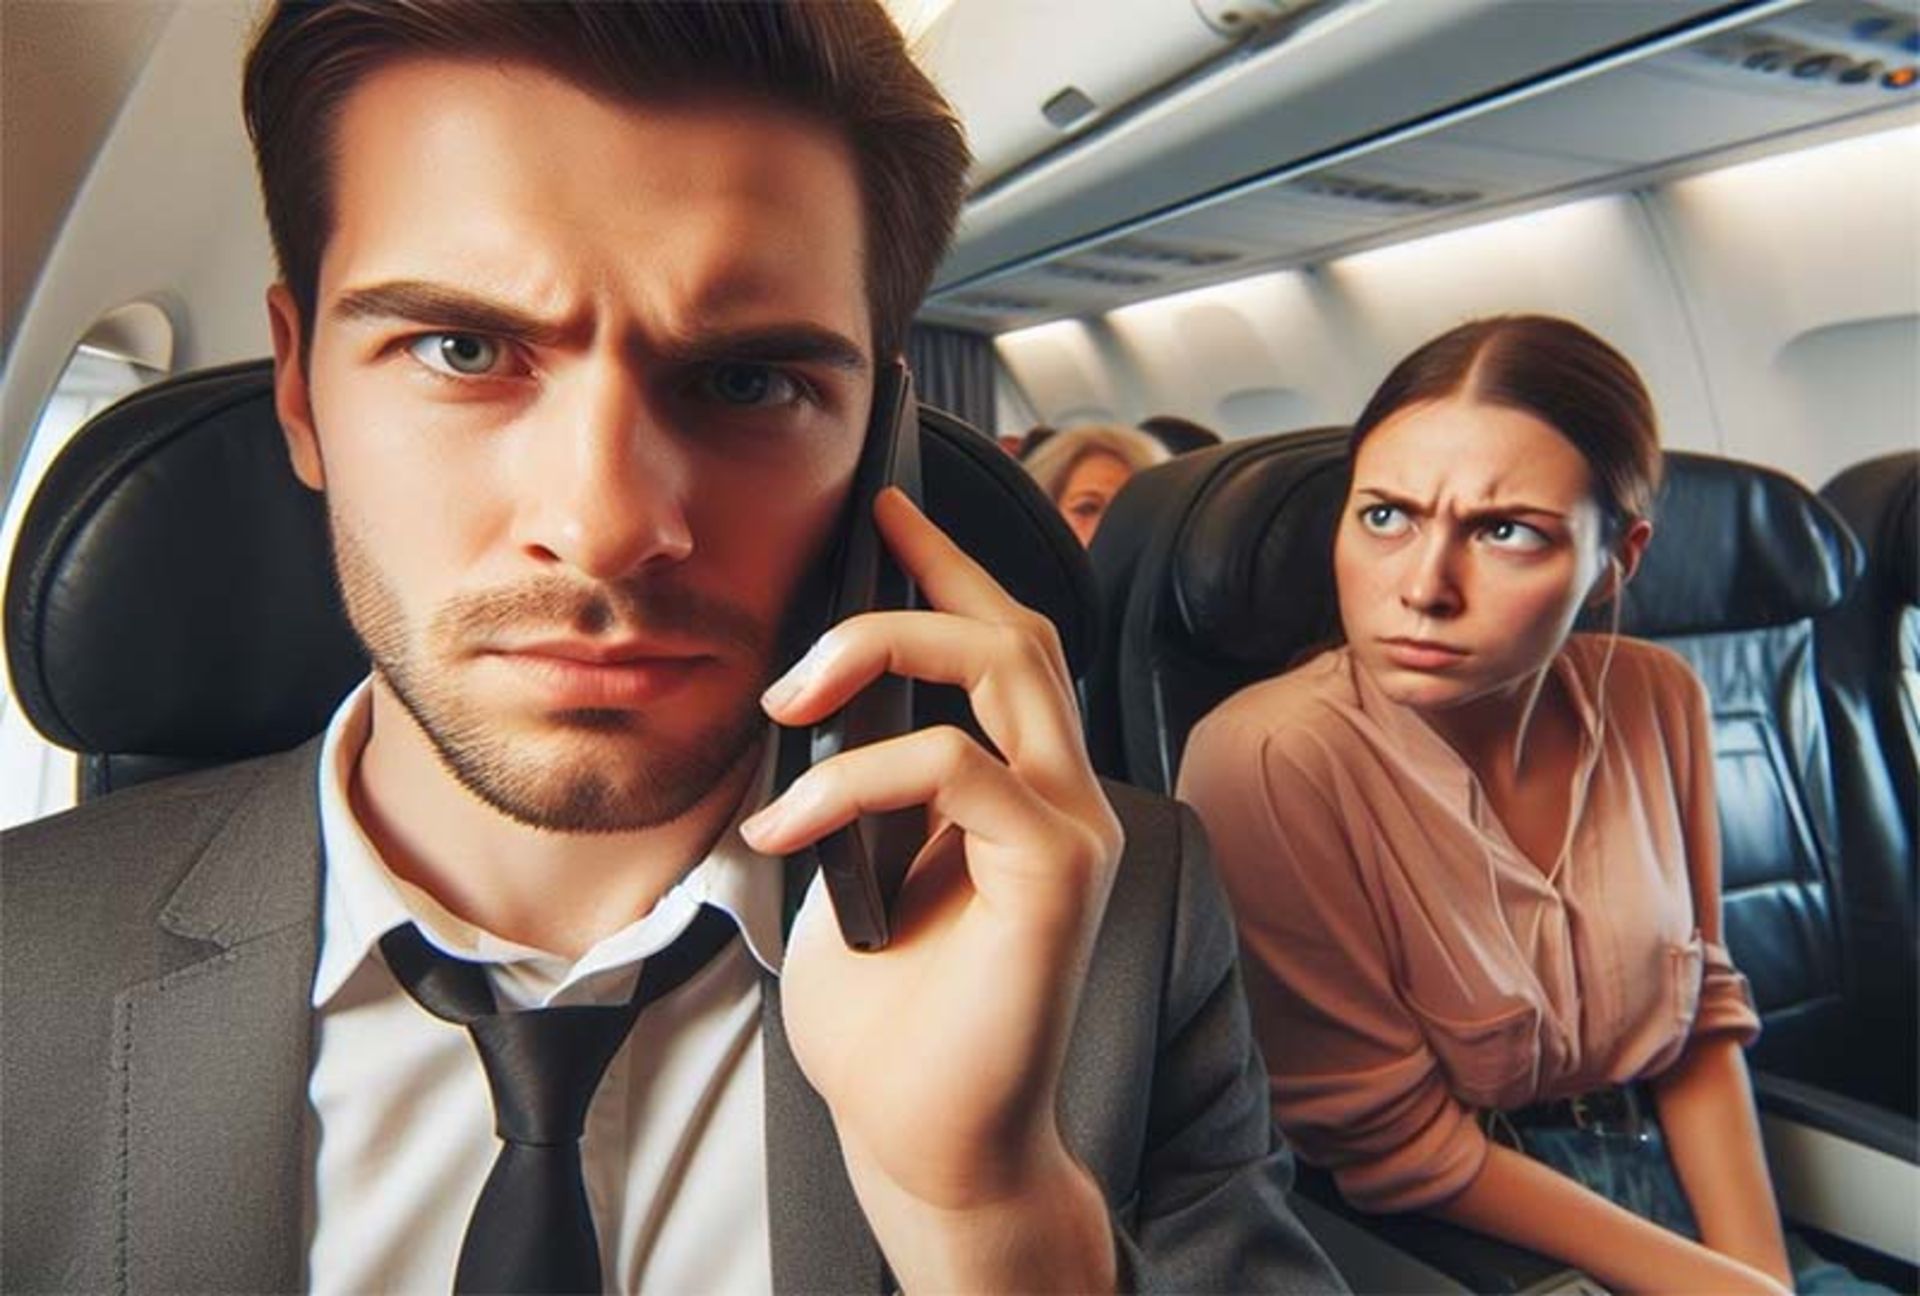 Someone is talking on a cell phone on the plane and another person is looking at him angrily.